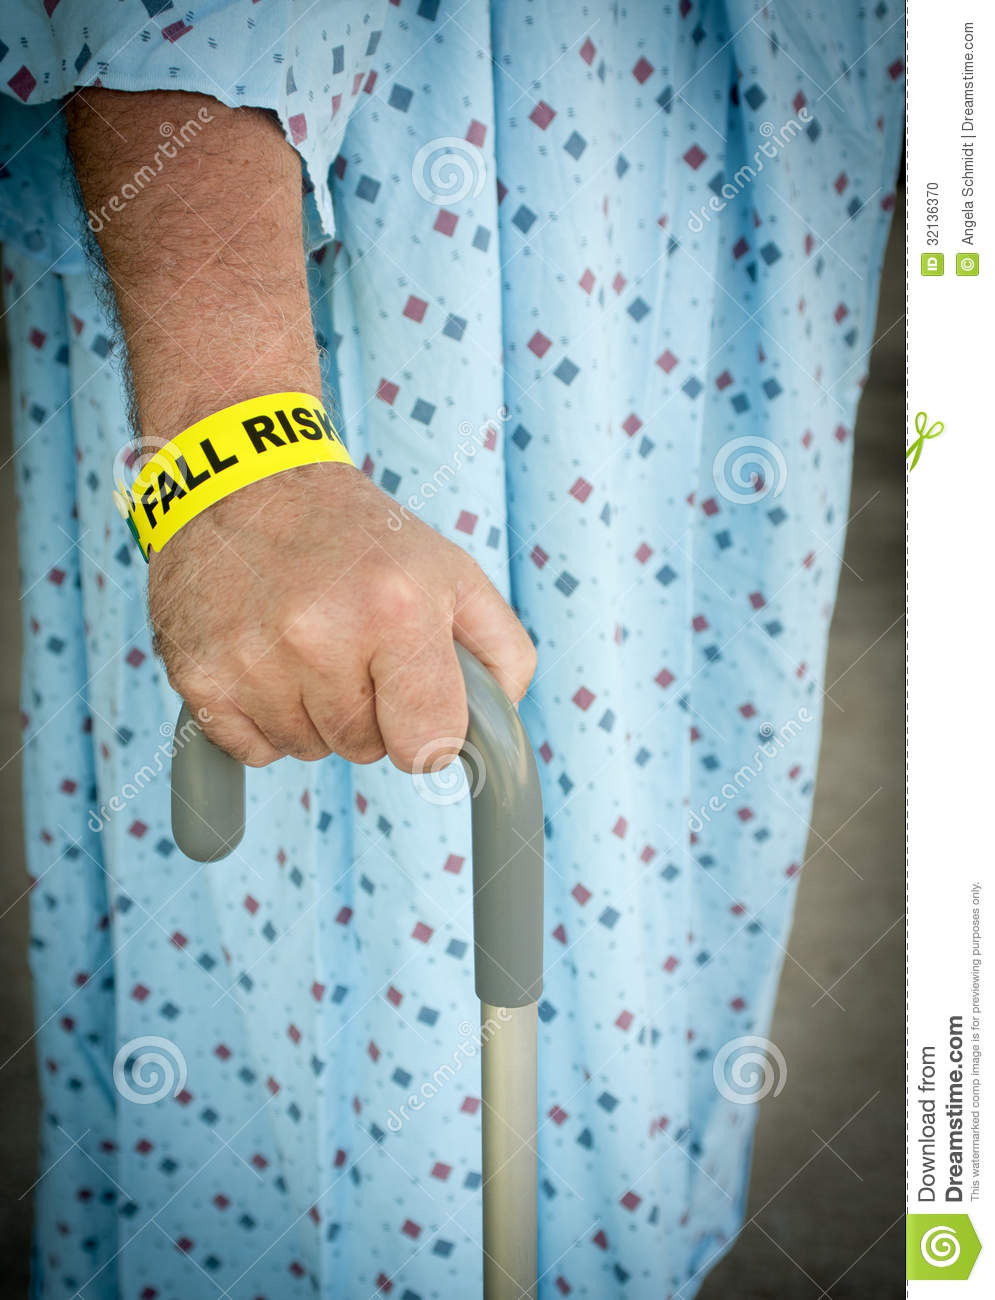 Fall Risk At The Hospital Stock Photo   Image  32136370